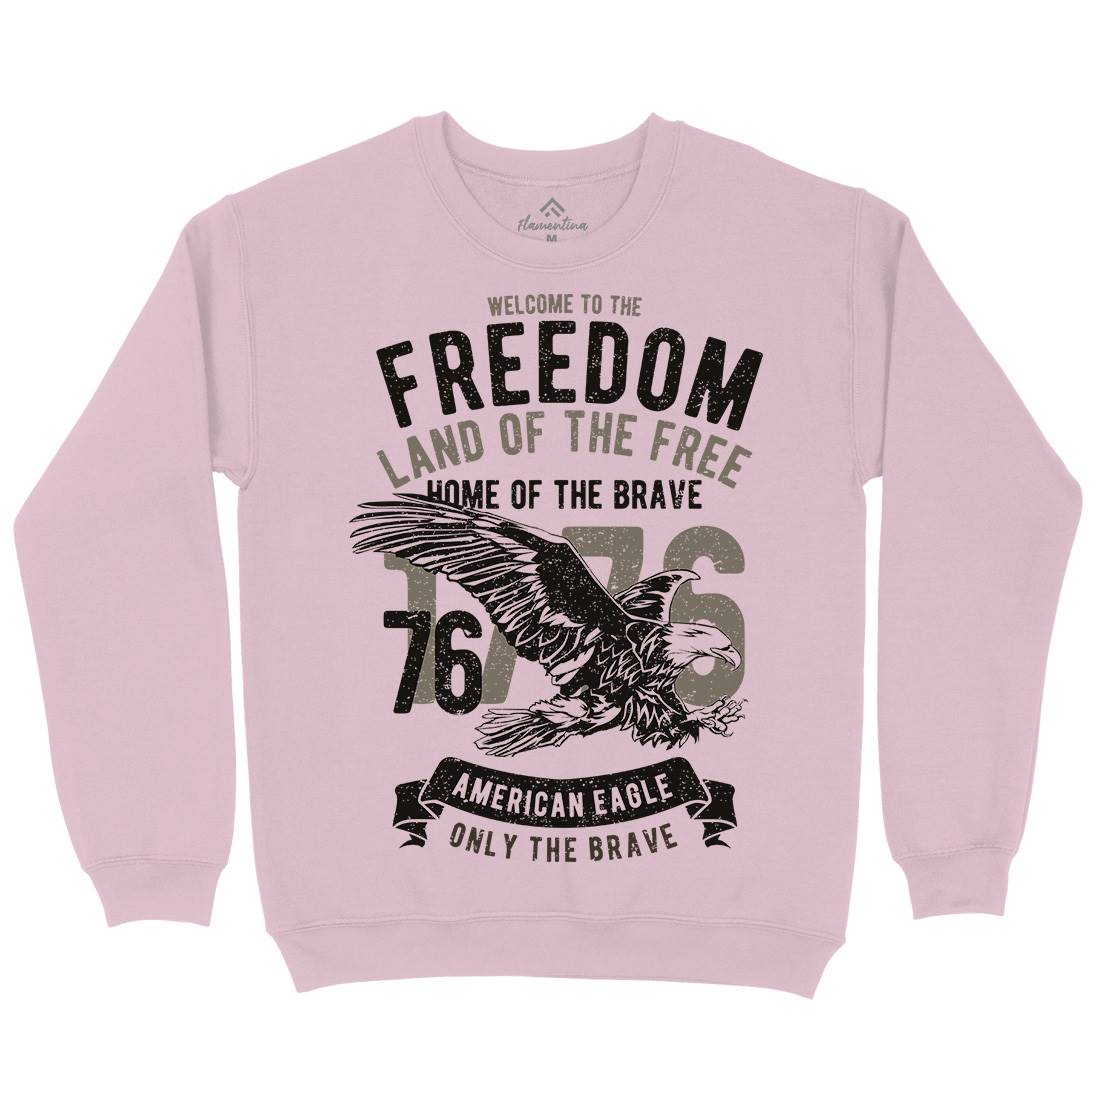 Welcome To The Freedom Kids Crew Neck Sweatshirt Army A790